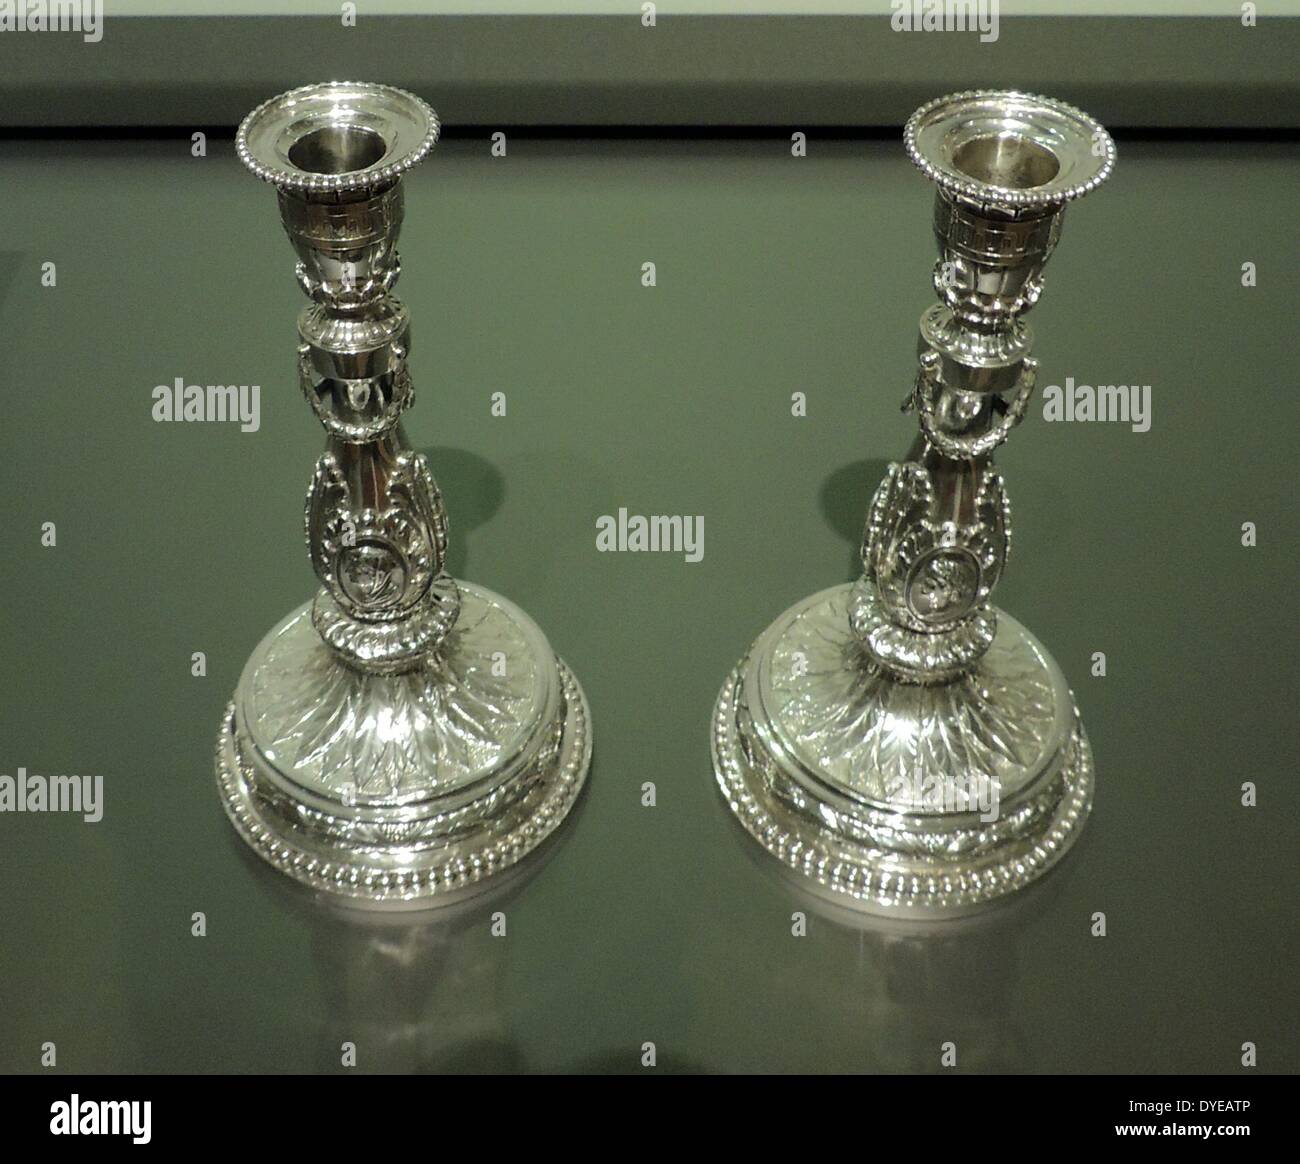 Pair of candlesticks by Johannes Schlotling (1730-1799), Amsterdam, 1785, silver. These candlesticks with acanthus leaves, medallions and festoons were inspired by a design by Paris artist Jean Francois Forty that was published around 1780. This type of short candlestick was probably intended for a dressing or gaming table. Stock Photo